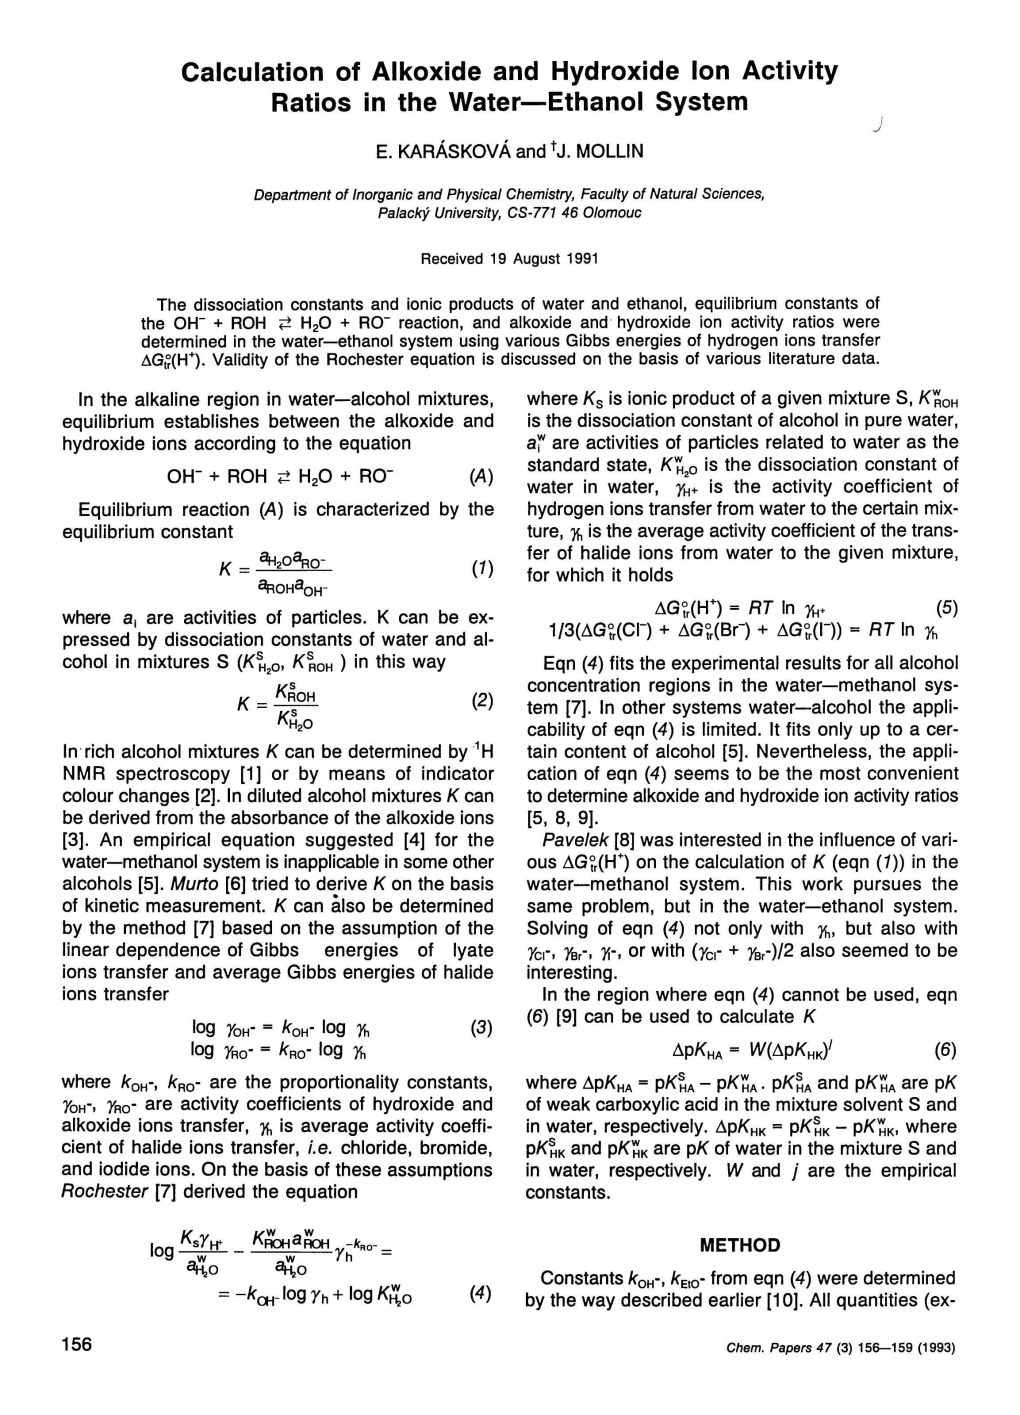 Calculation of Alkoxide and Hydroxide Ion Activity Ratios in the Water—Ethanol System I E